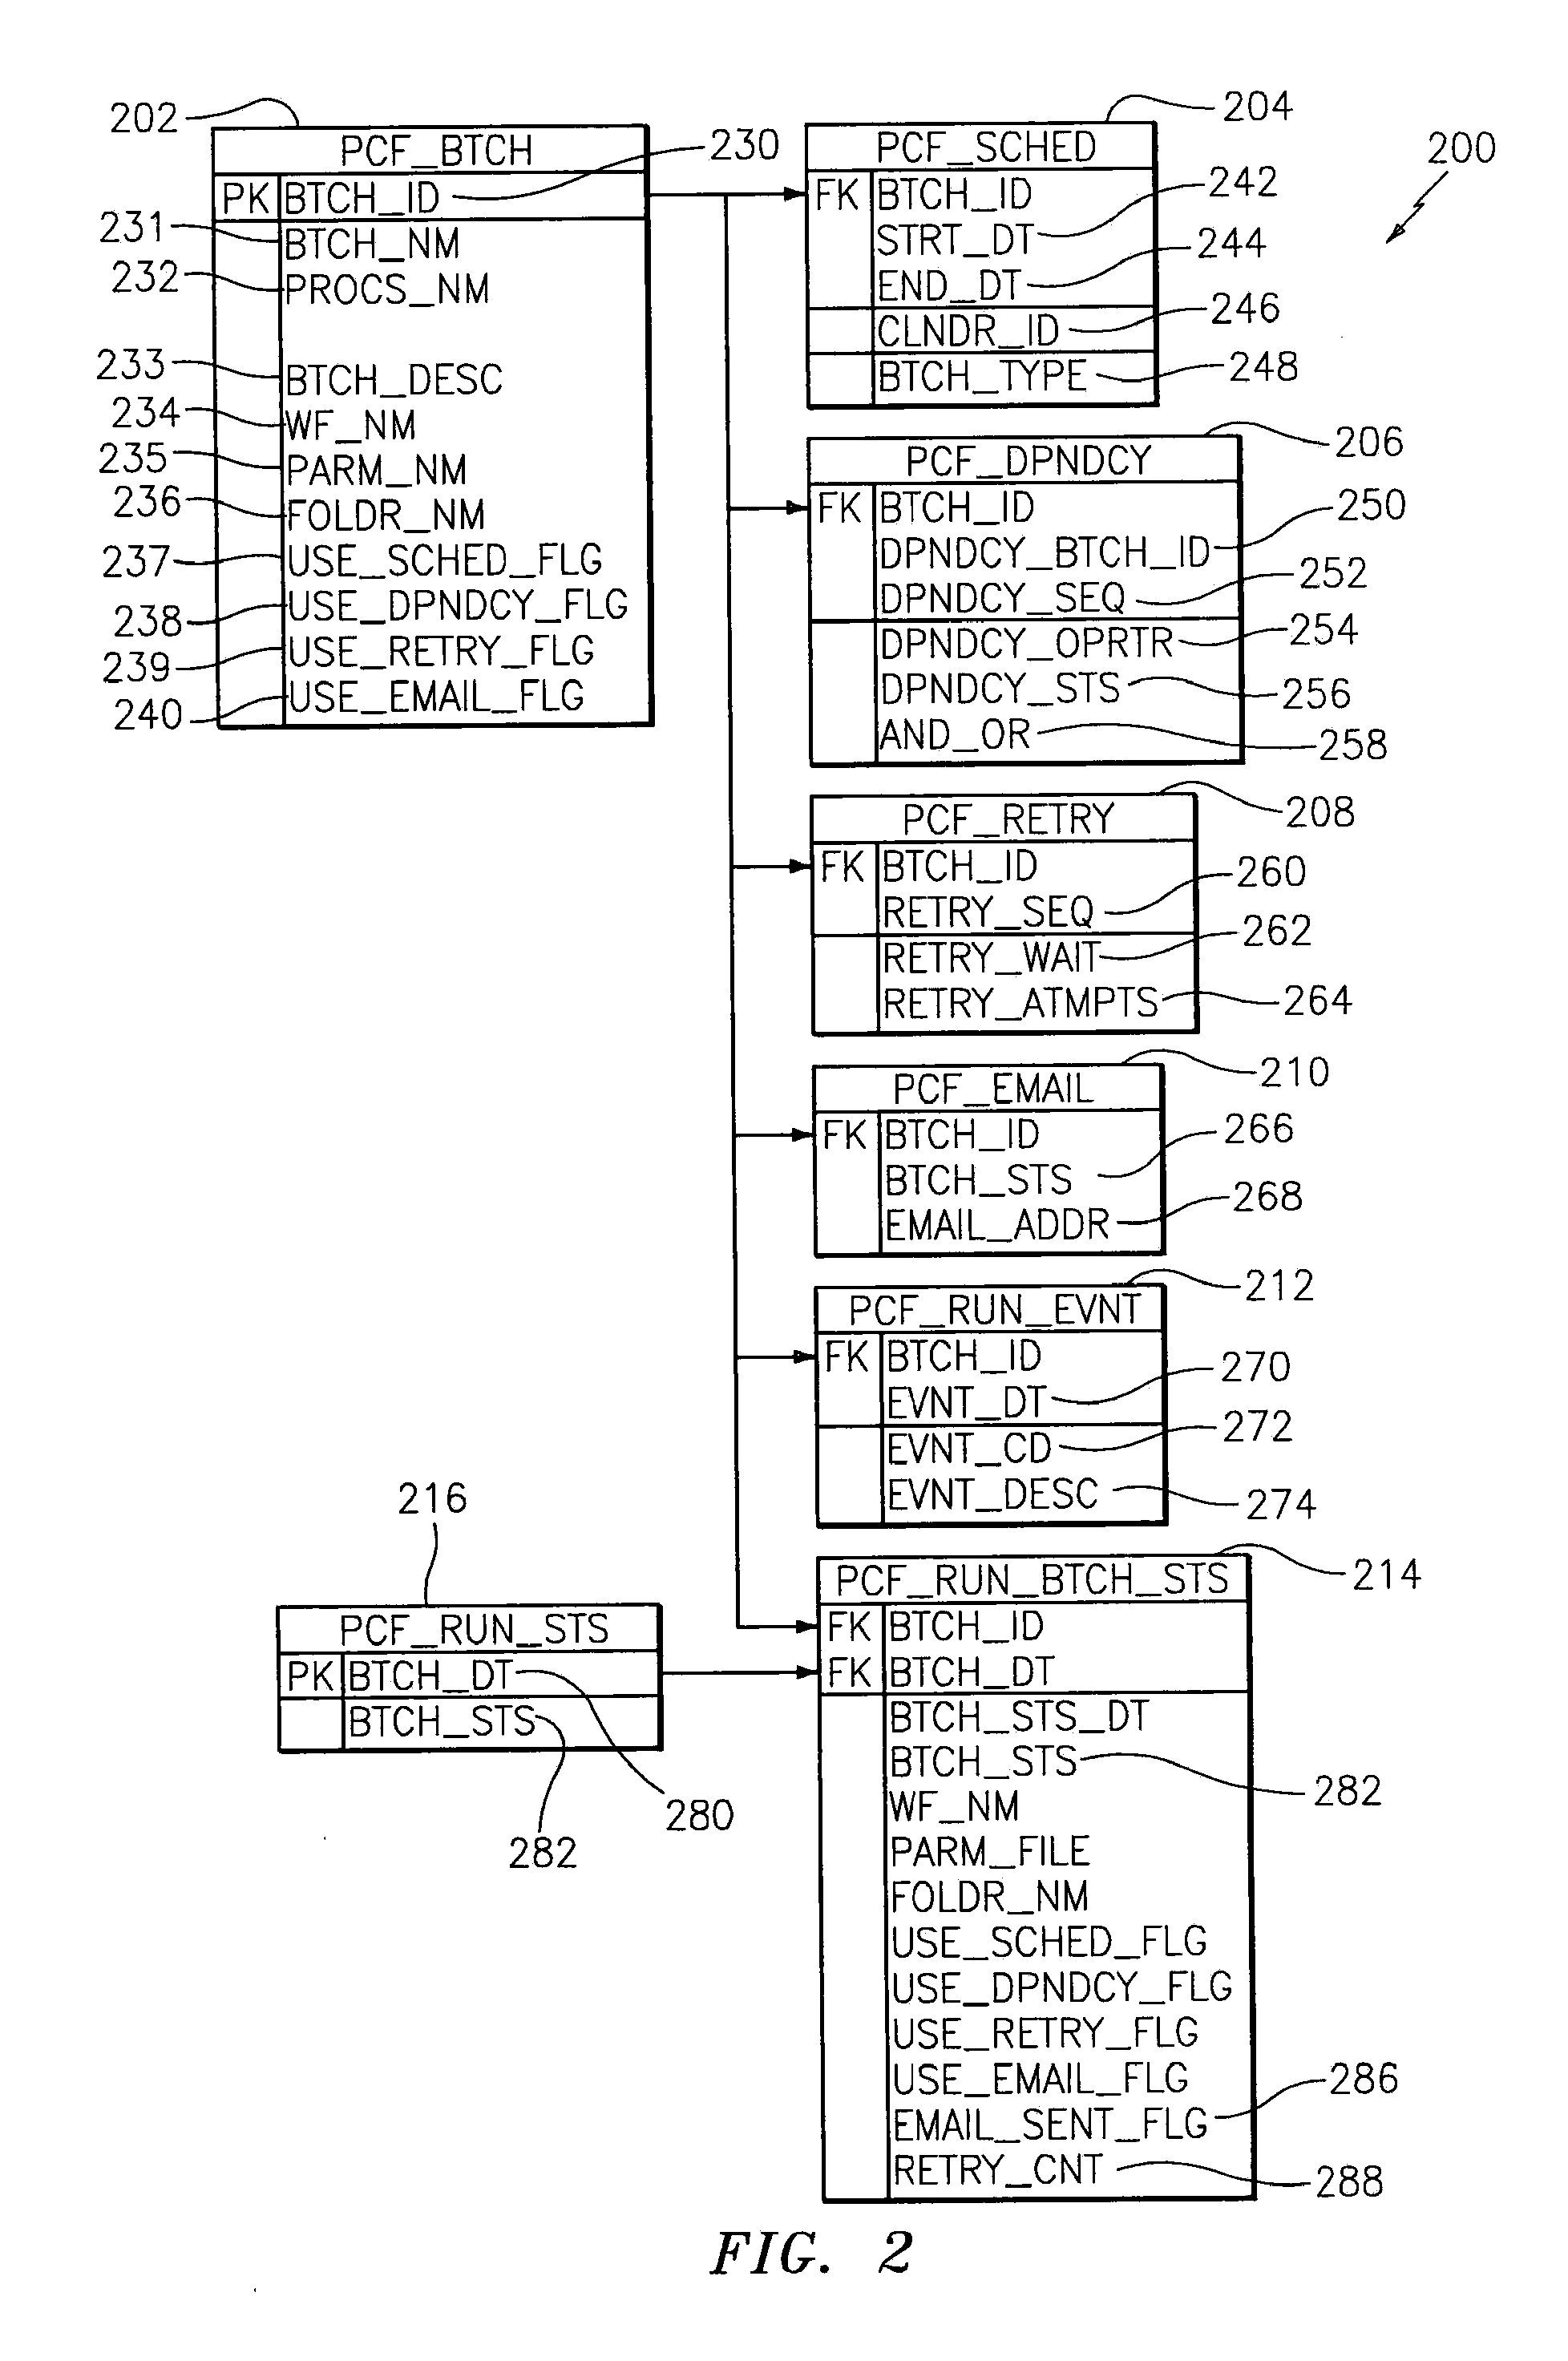 Methods, systems, and computer program products for managing batch operations in an enterprise data integration platform environment